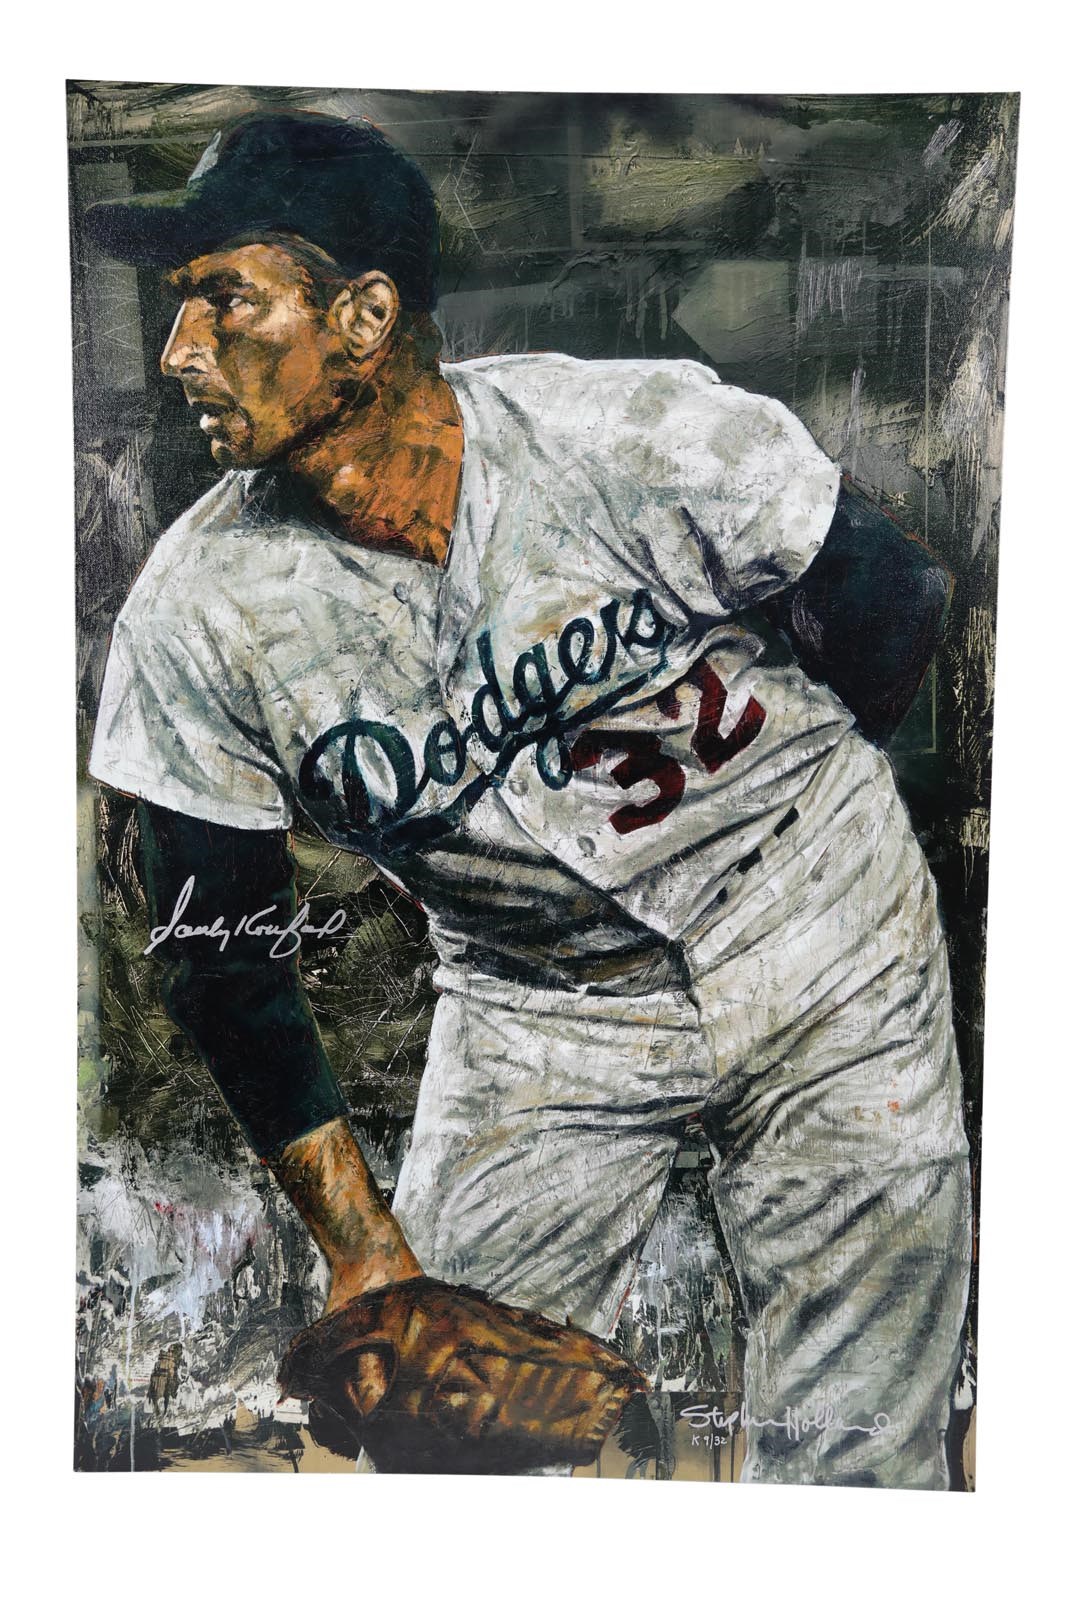 Artists - Koufax "Profile" Special K Holland Proof Giclee